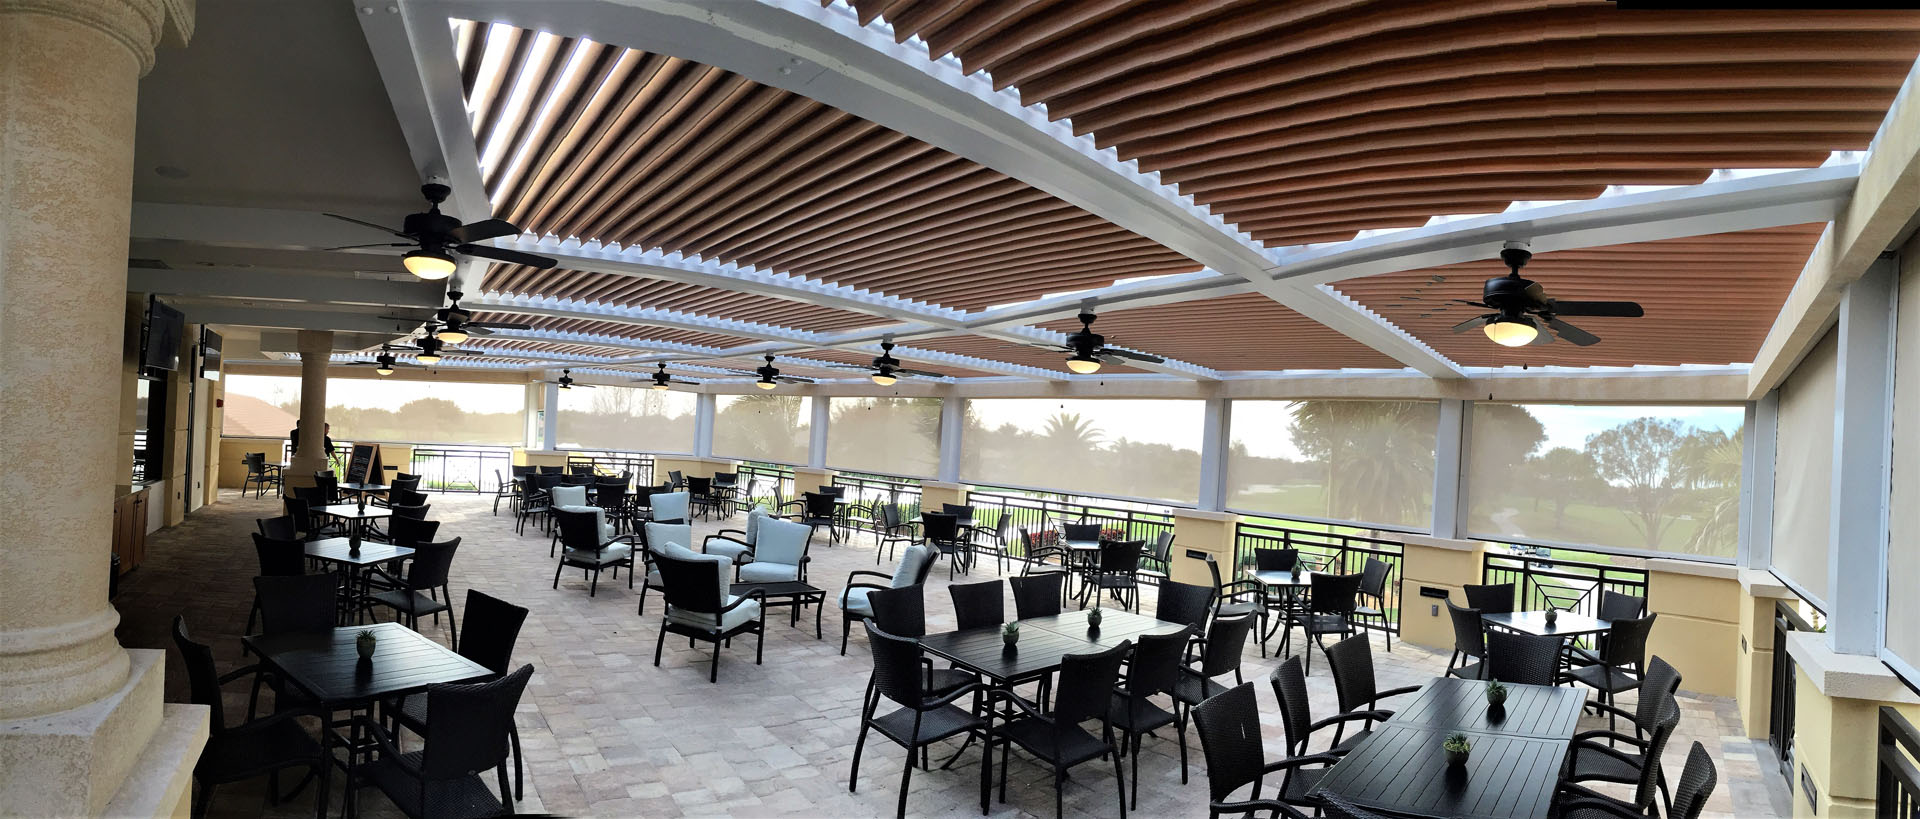 The outdoor area of a restaurant covered by a StruXure pergola that has motorized screens.